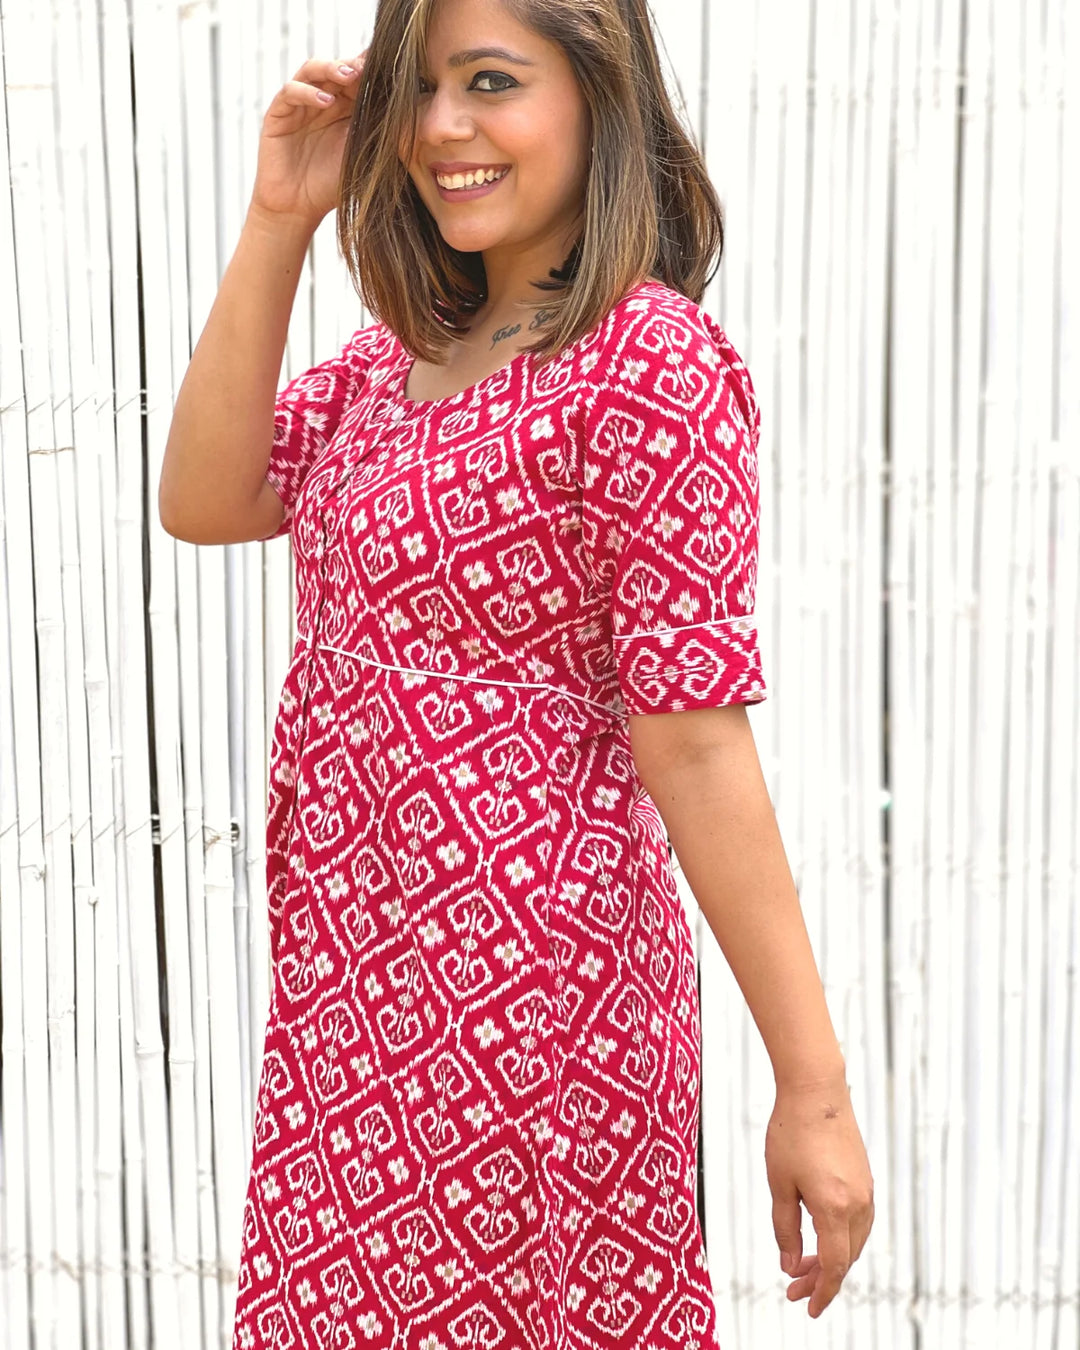 Crimson Jacket Dress in Cotton With Pockets